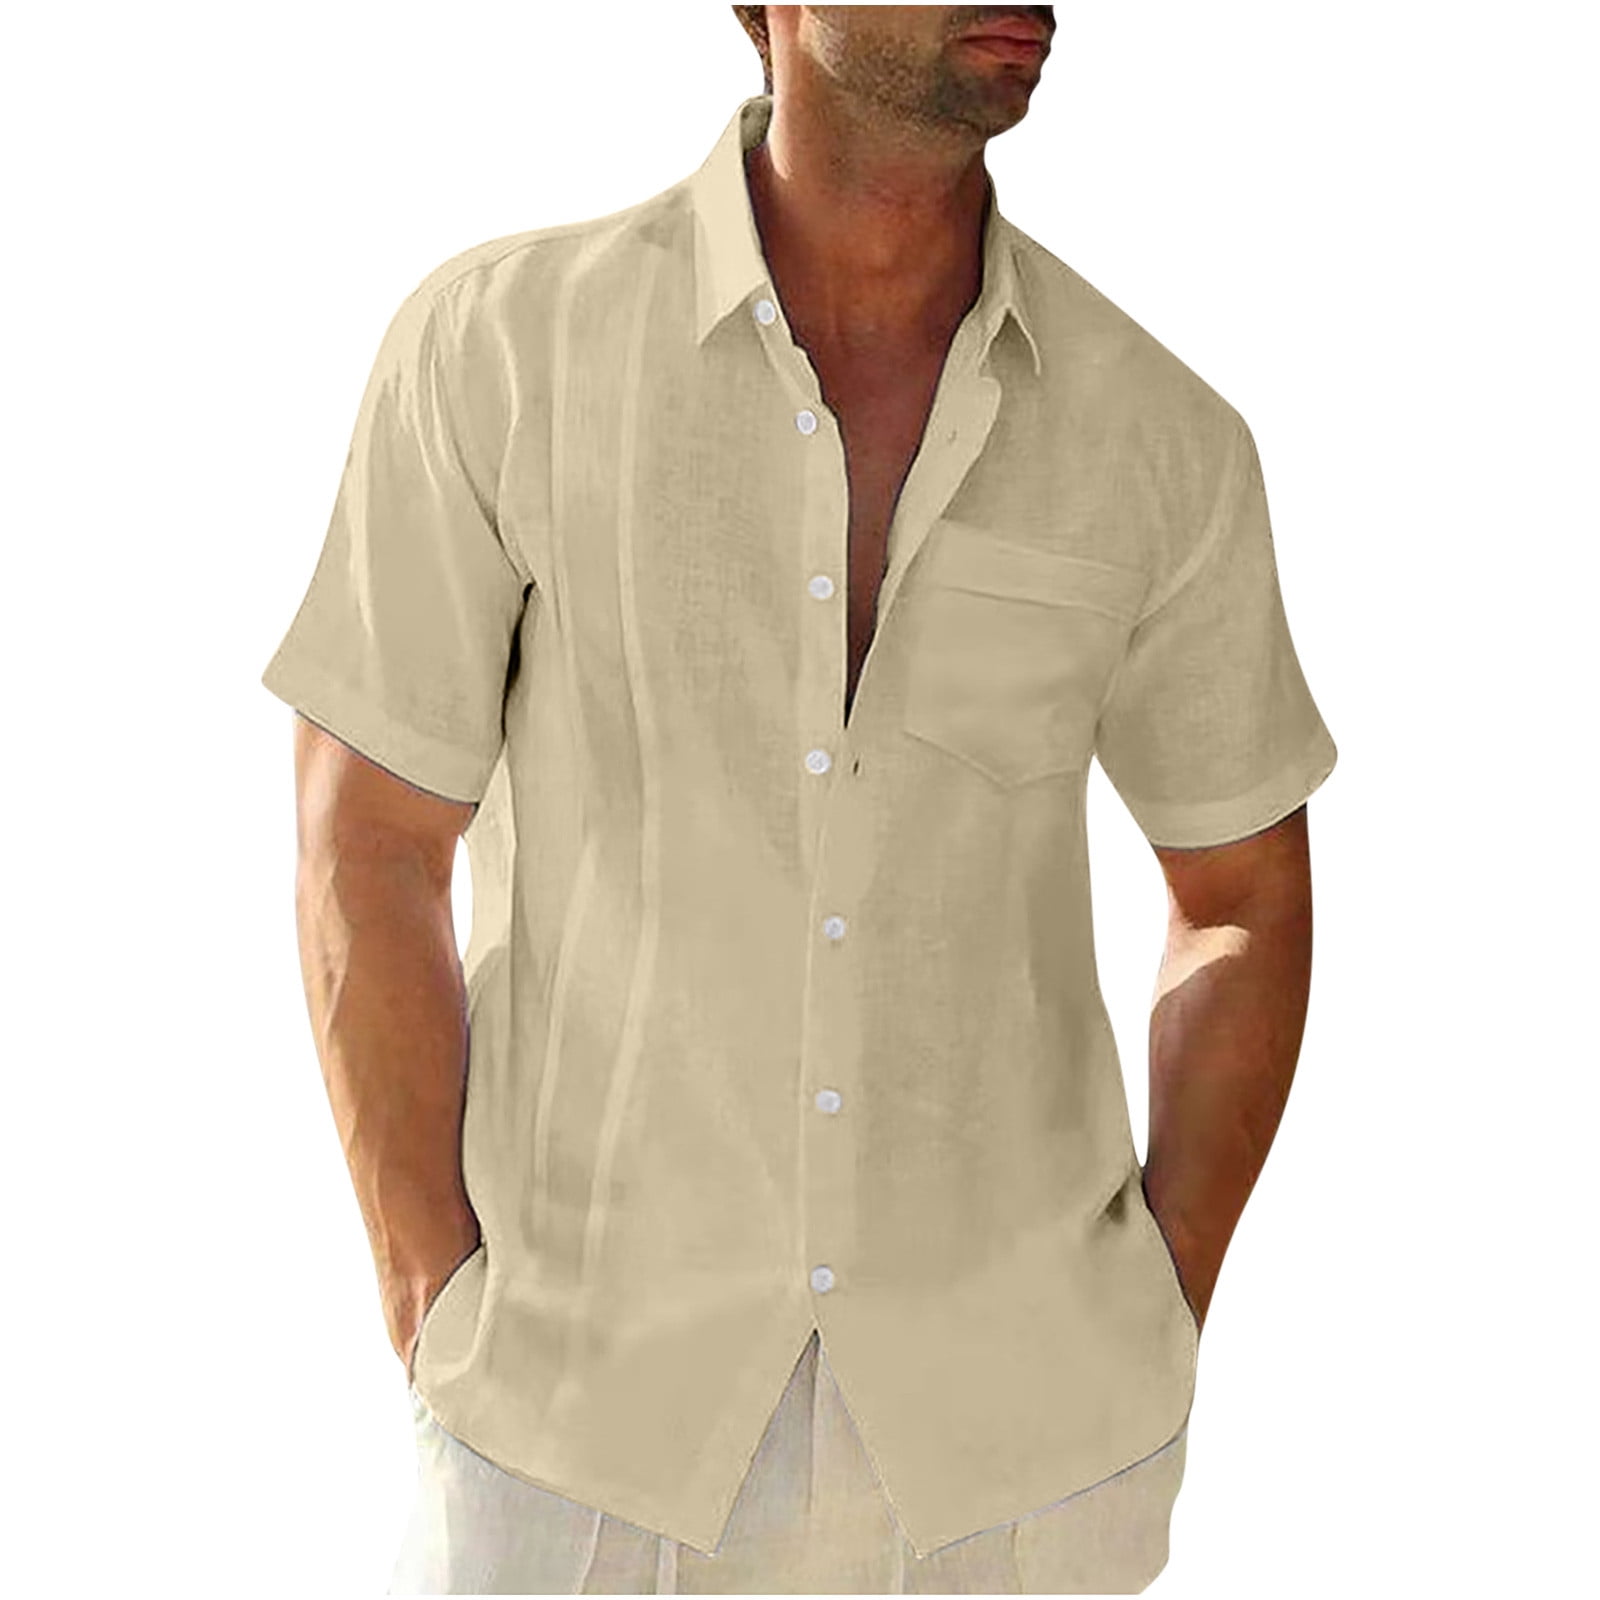 VSSSJ Mens Cotton and Linen Shirts Loose Fit Solid Color Button Down Short  Sleeve Collared Tee Shirts with Pocket Casual Summer Walking Shirt Blouse